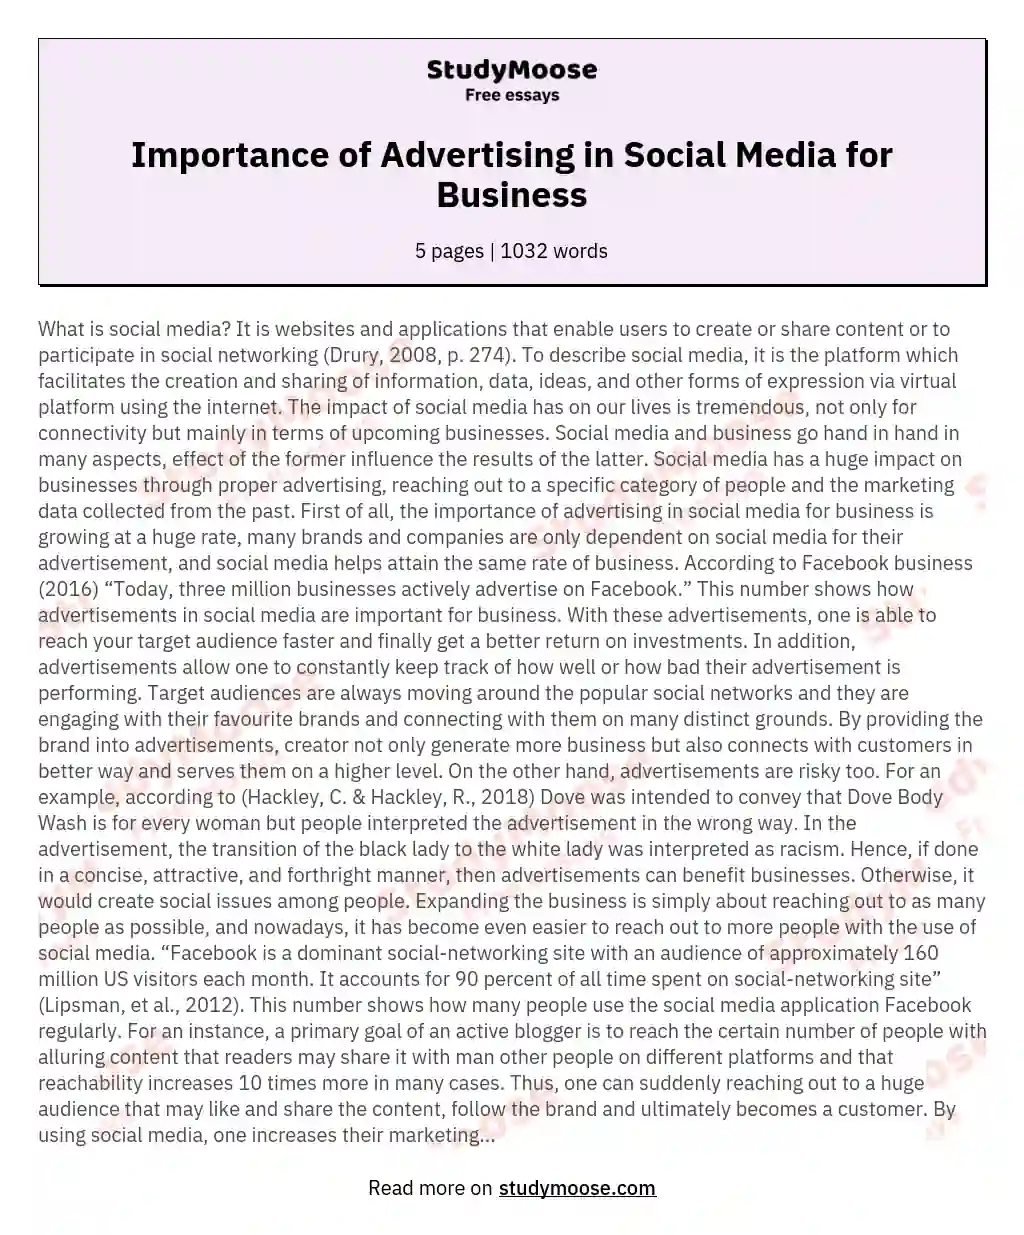 Importance of Advertising in Social Media for Business